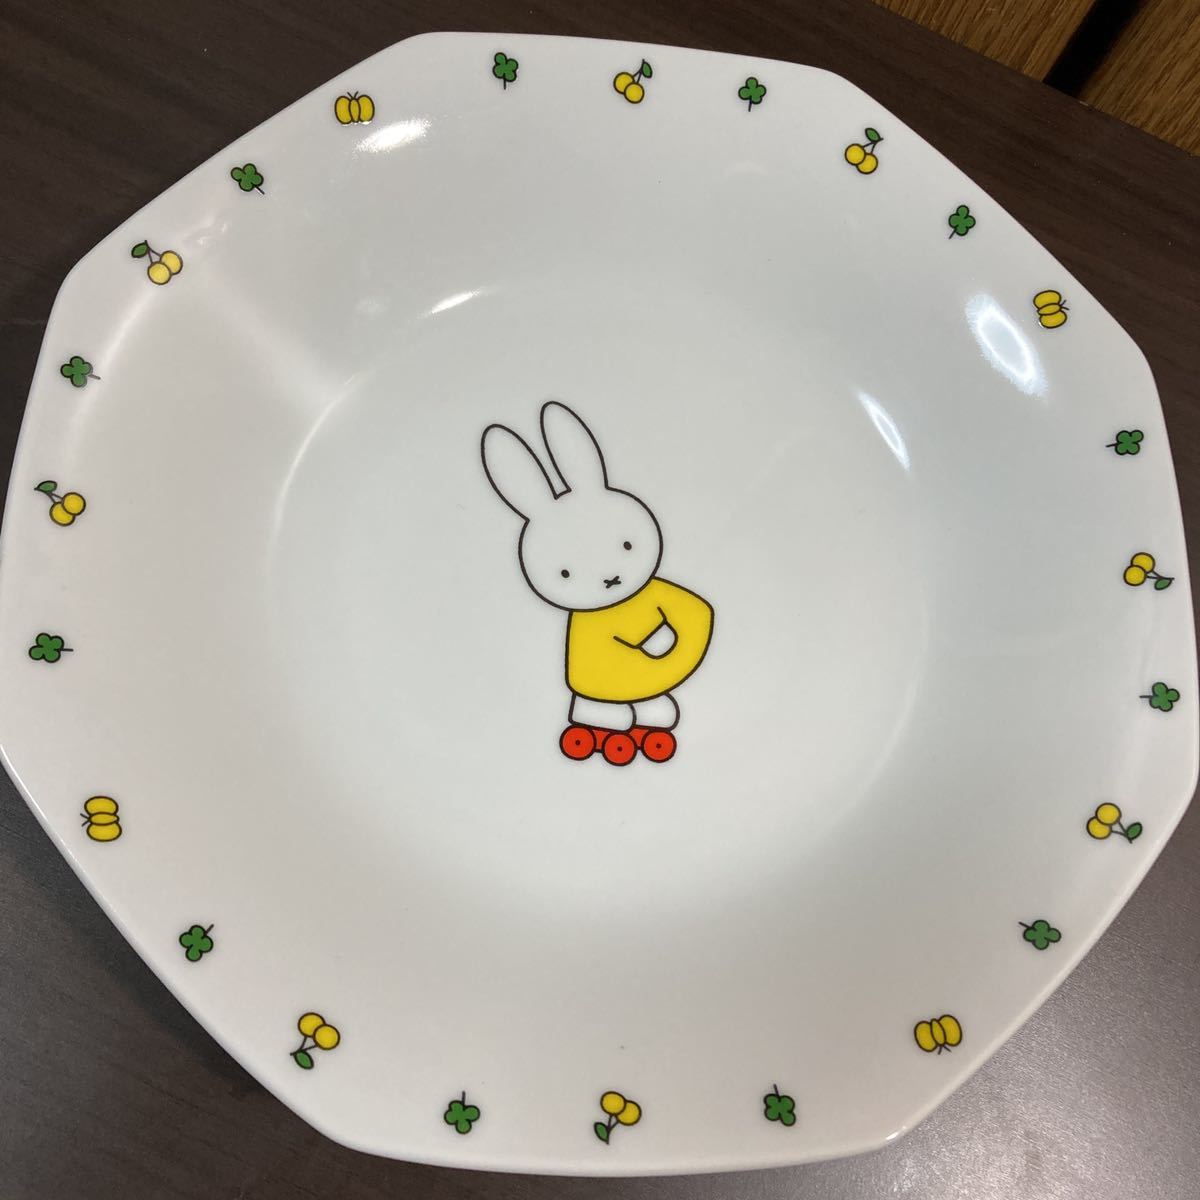 V Miffy { plate 2 sheets small bowl 2 piece china spoon 2 ps } chahan plate plate soup plate Chinese milk vetch ceramics made 